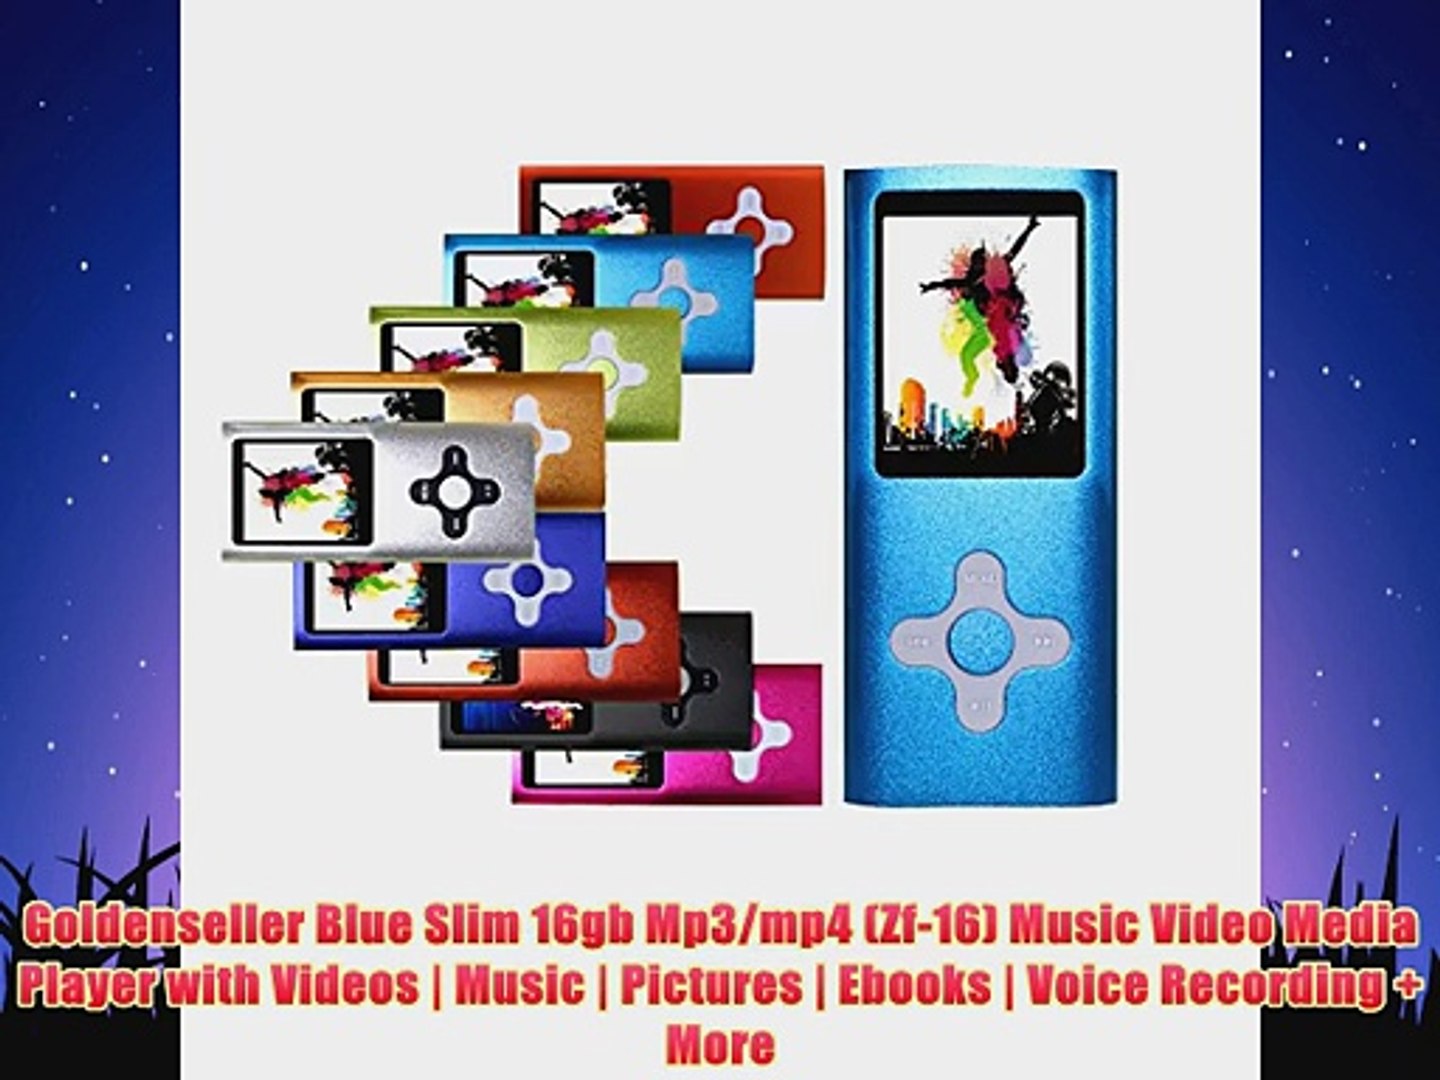 Goldenseller Blue Slim 16gb Mp3mp4 Zf16 Music Video Media Player with Videos Music Pictures Ebooks V